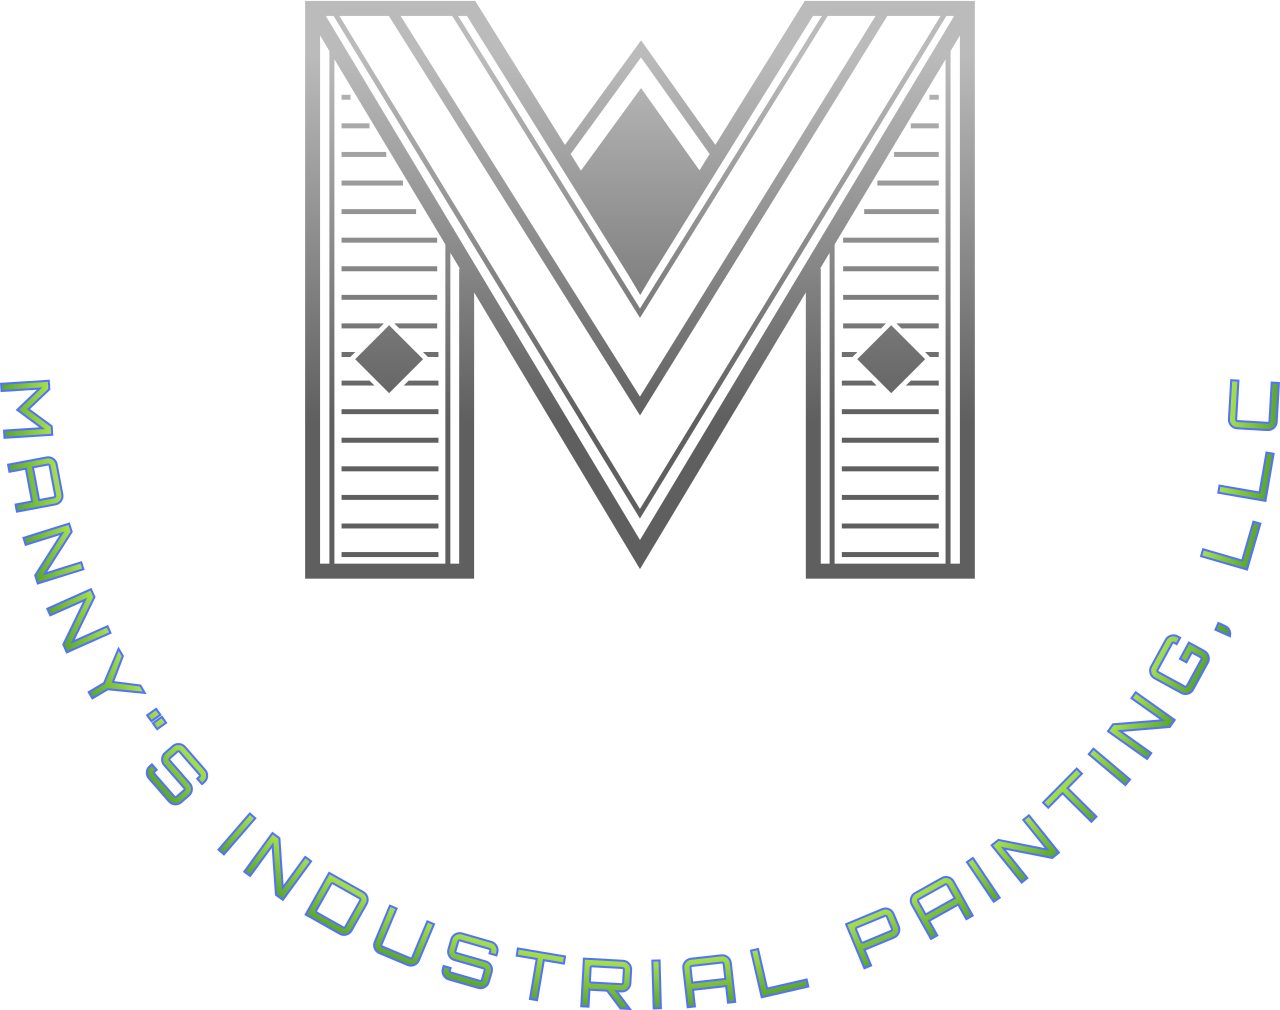 MANNY"S INDUSTRIAL PAINTING, LLC's logo